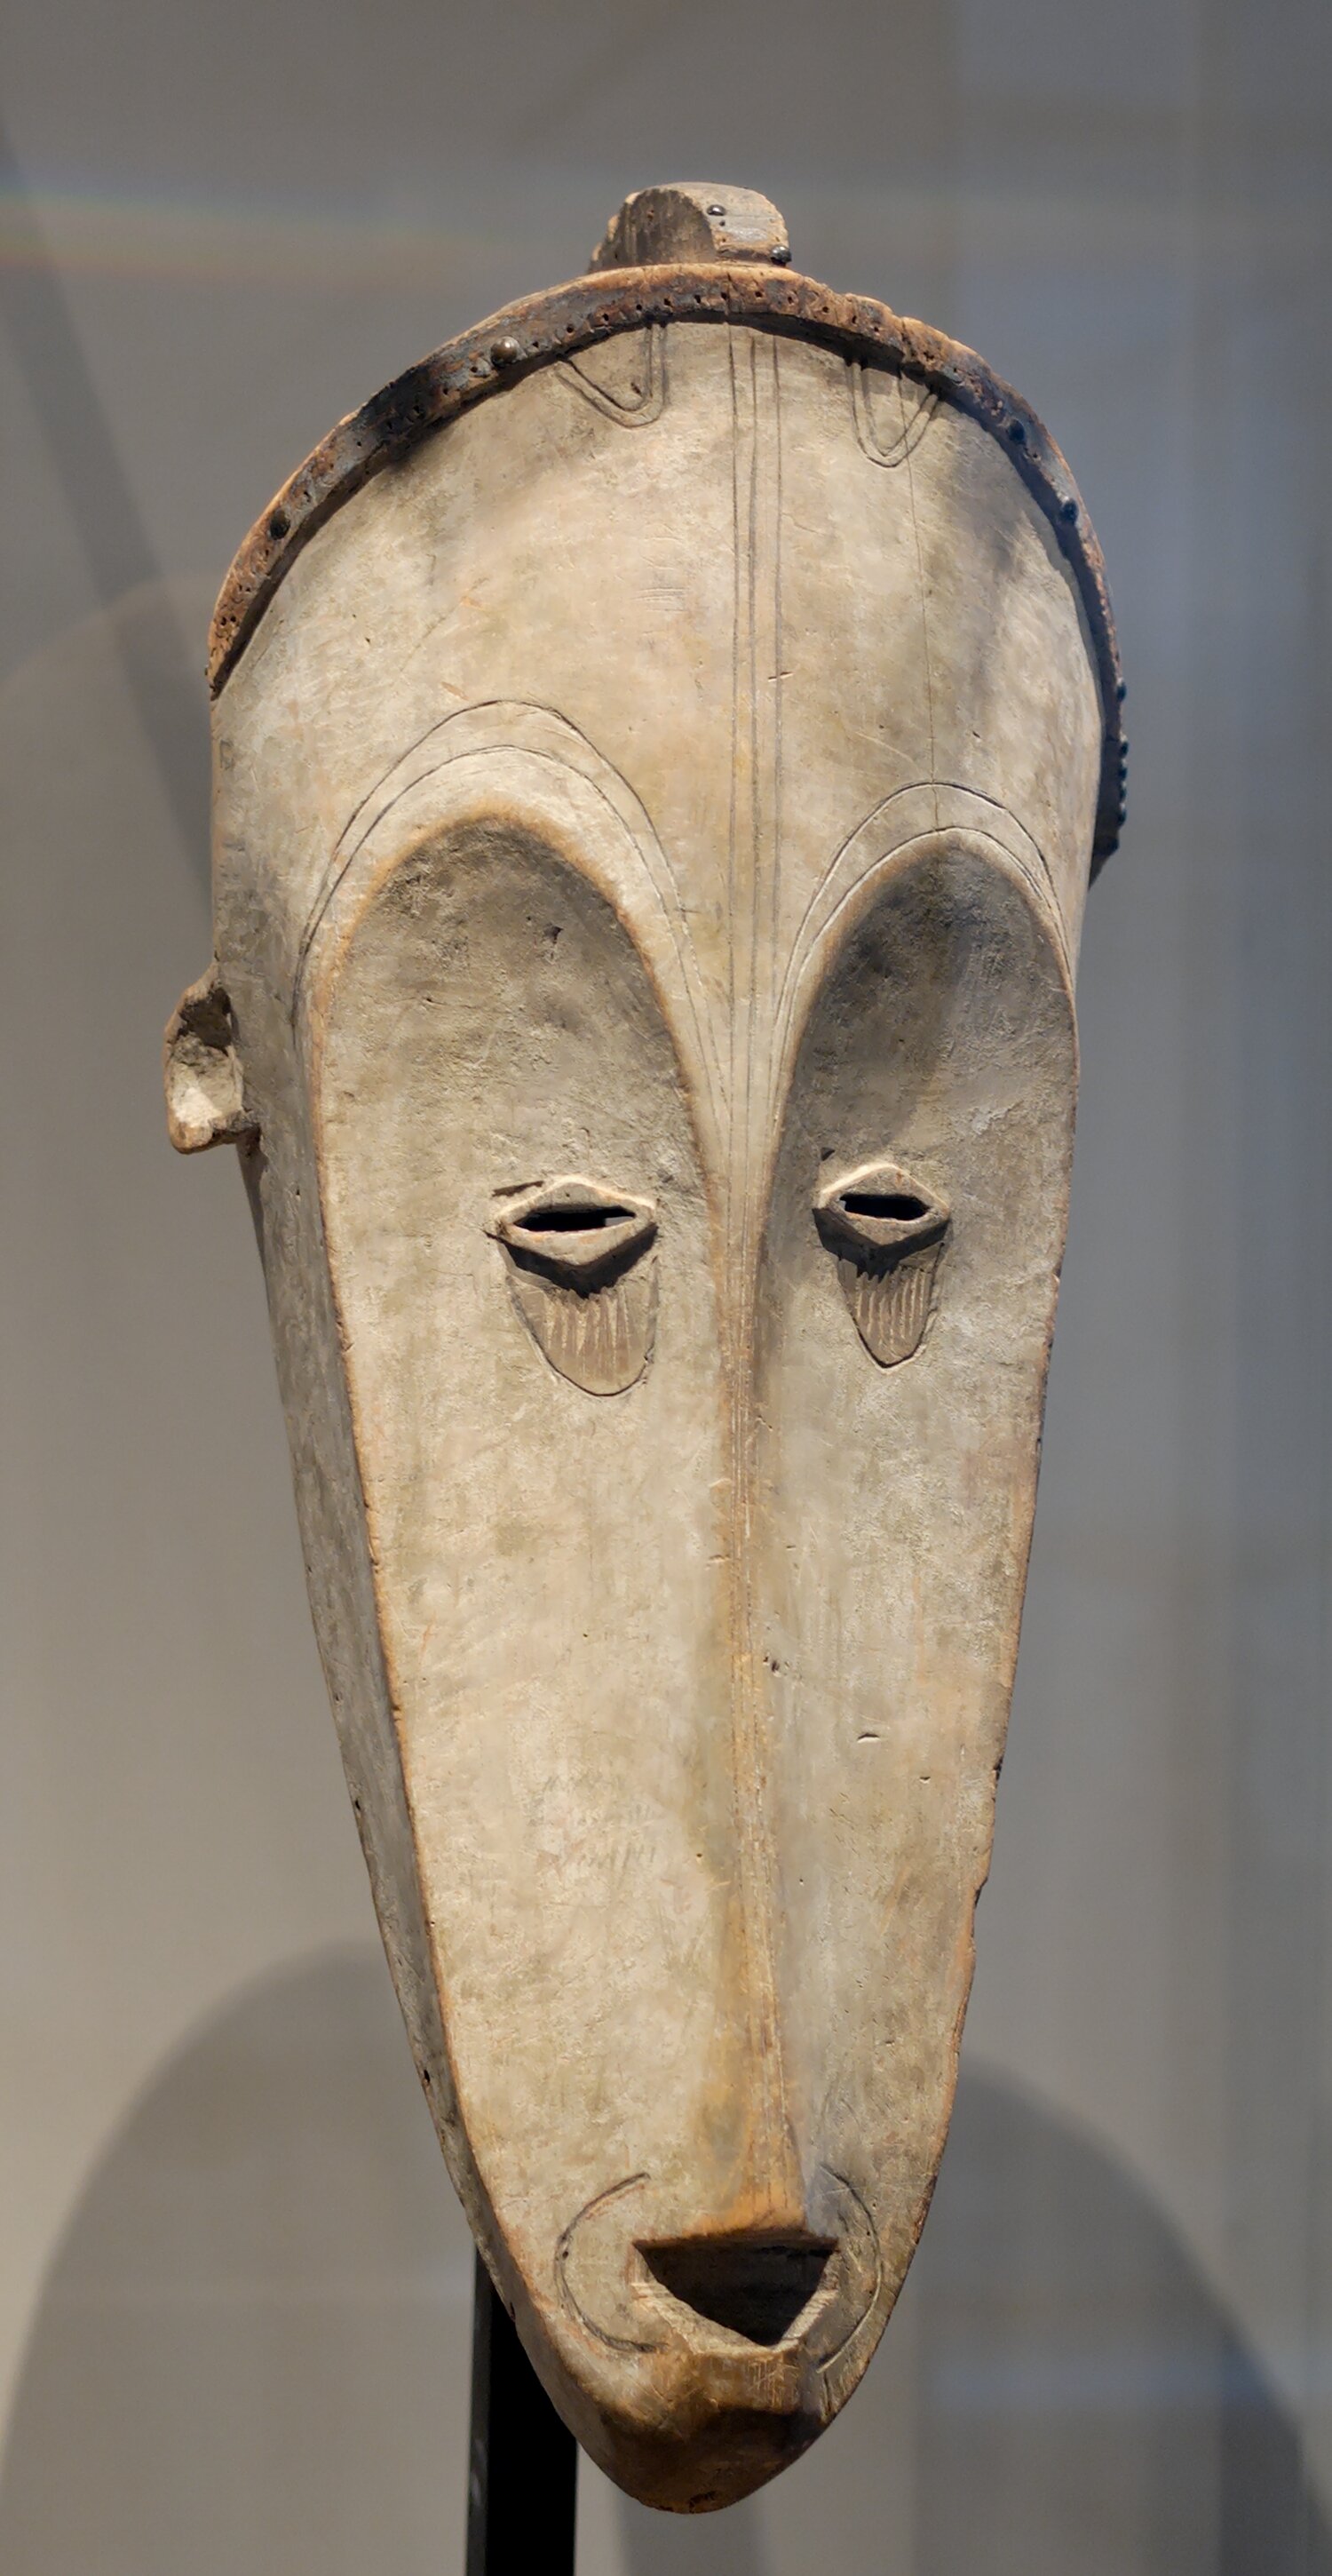 African mask that inspired Picasso